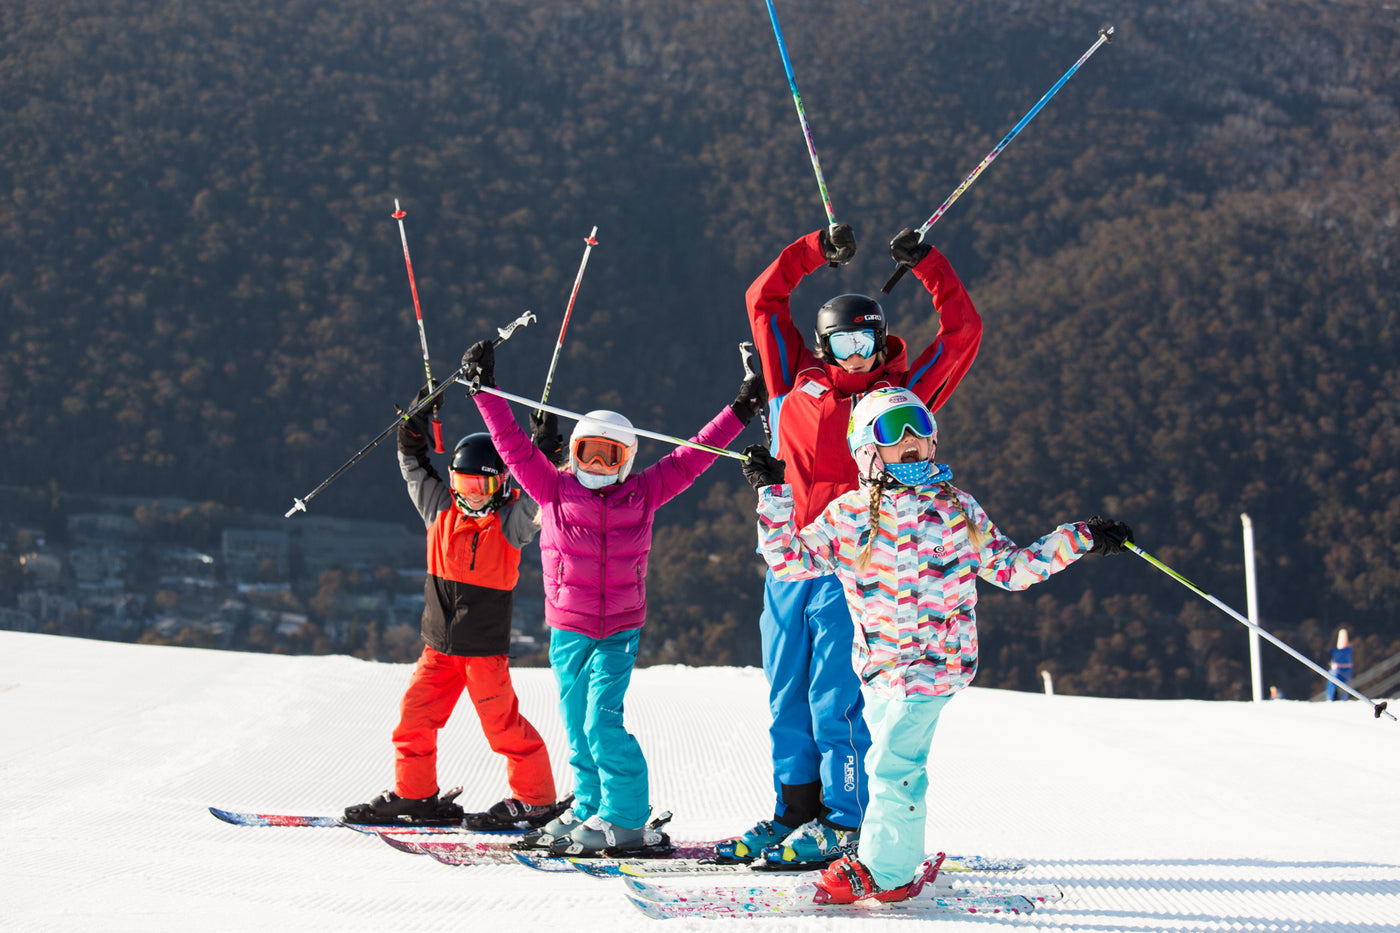 5 Best Kids Ski Accessories that will make your life easier